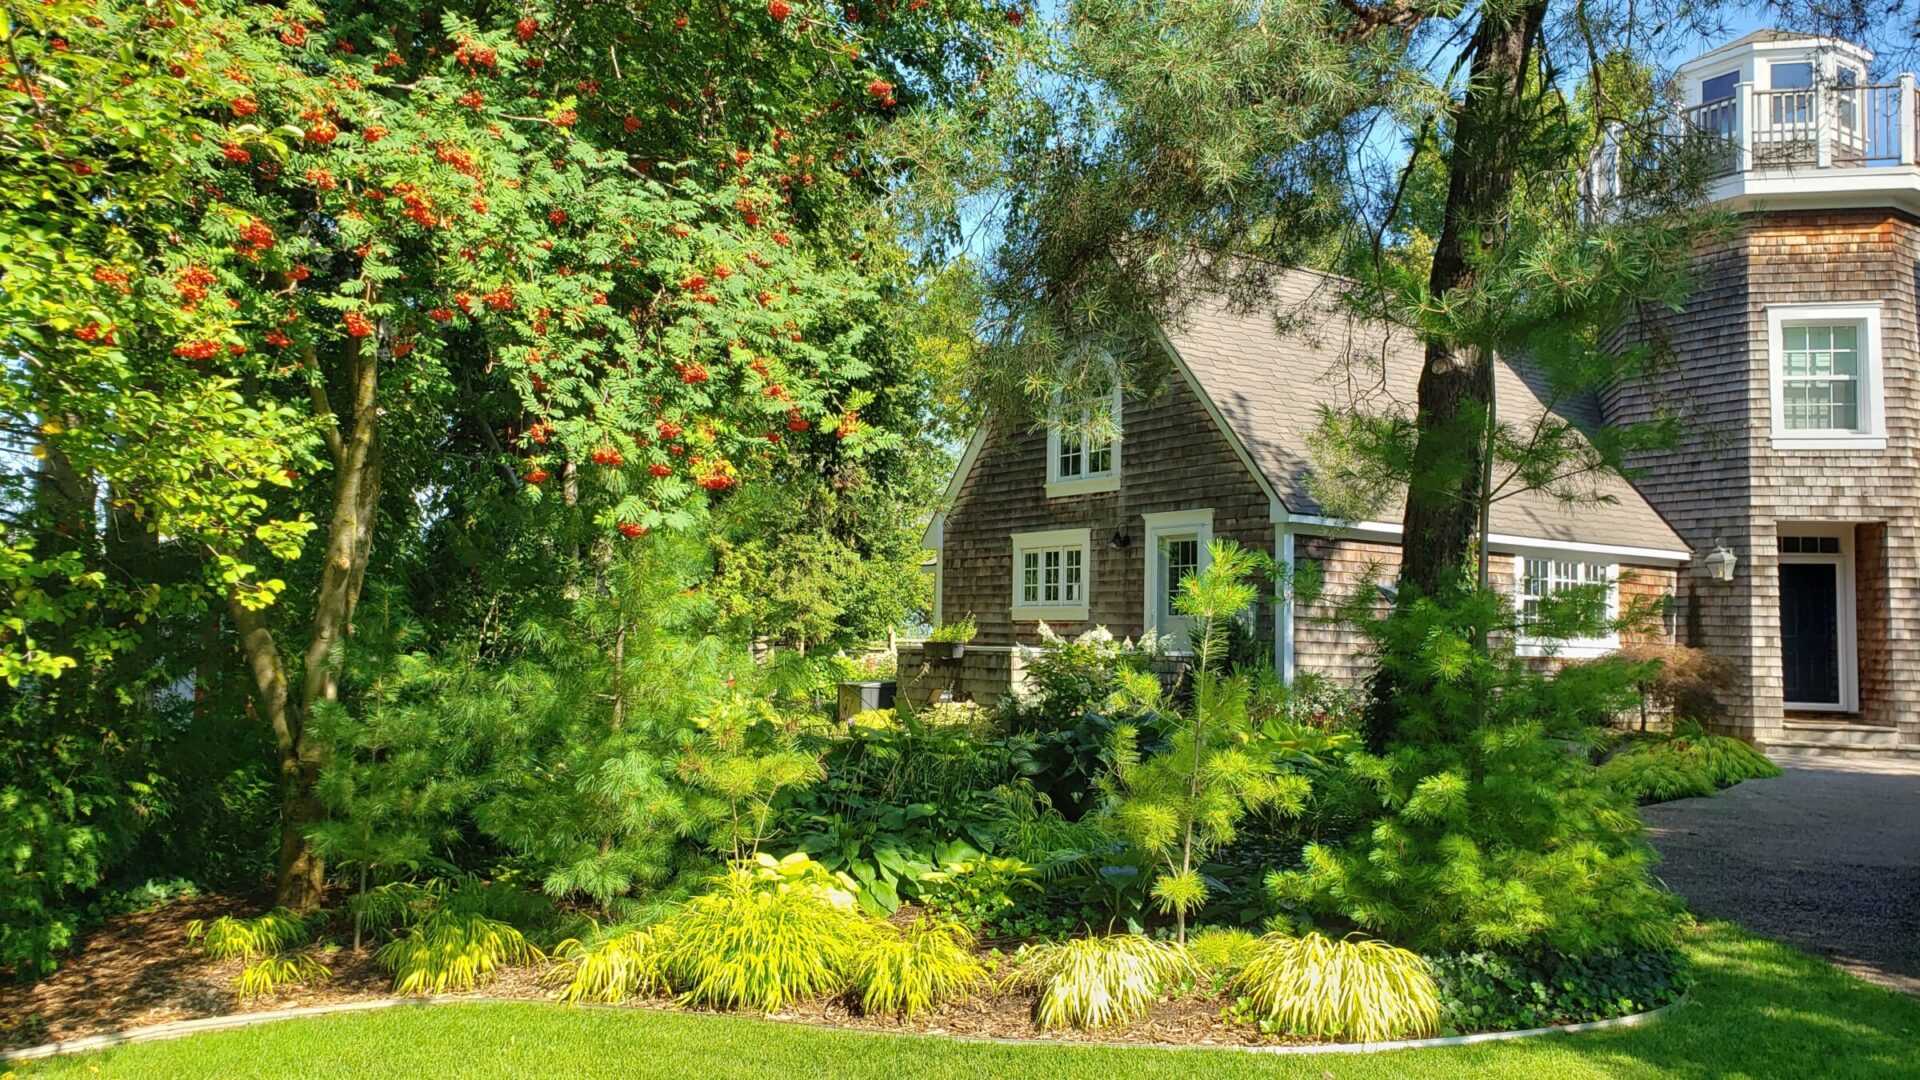 A charming house with cedar shingles nestled among lush greenery under a clear blue sky. Bright red berries adorn a nearby tree.